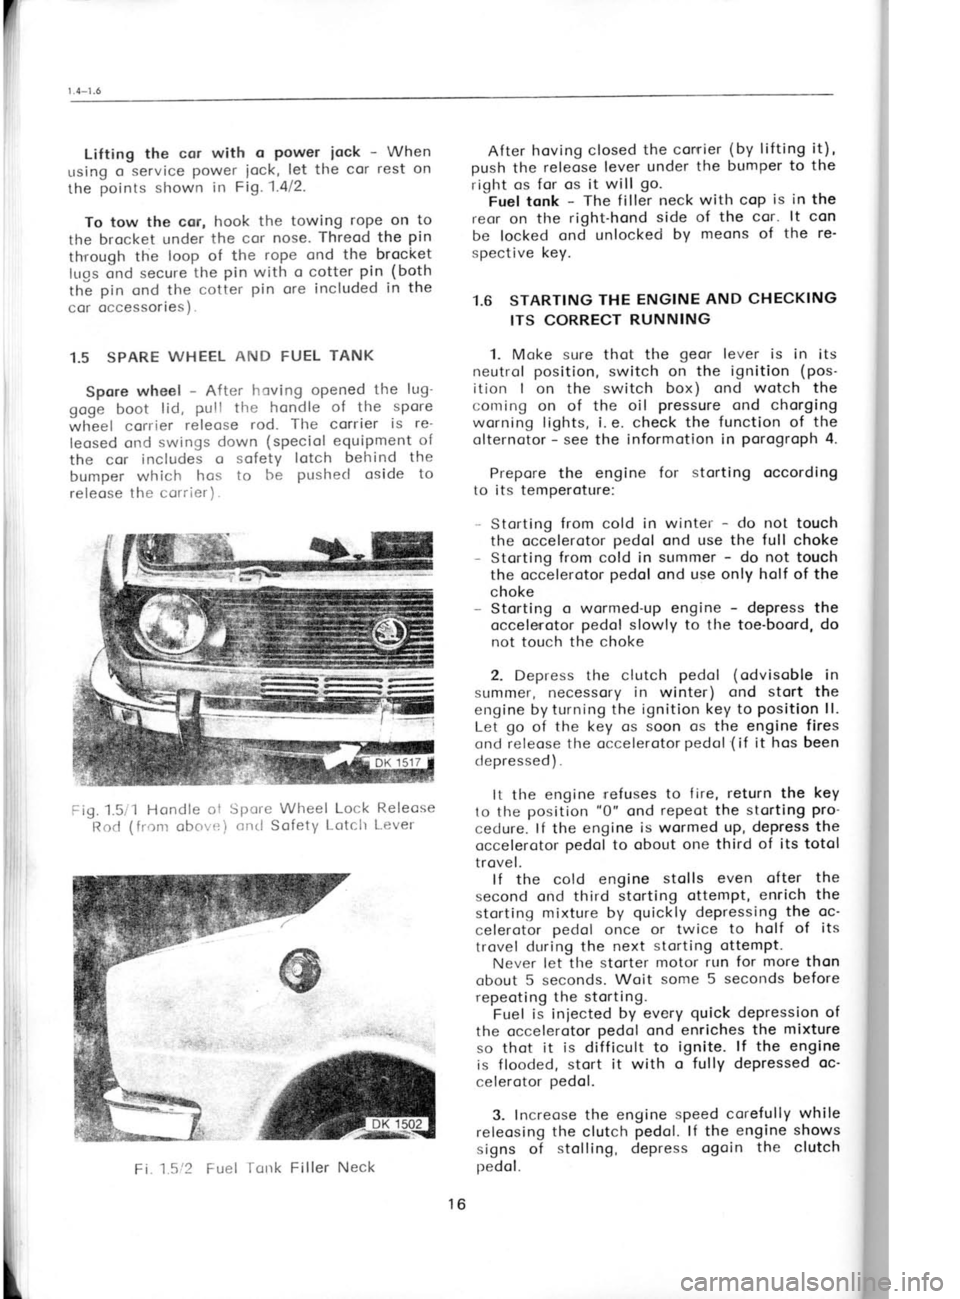 SKODA 120L 1980  Workshop Manual Lifting 
the cor with  o 
Power  iock - 
When
r-rsing  o service 
Power iock, let the 
cor rest  on
the  points 
shown  in Fi1.1.412.
To tow  the  cor,  hook the  towing  rope on 
to
the brocket  unde